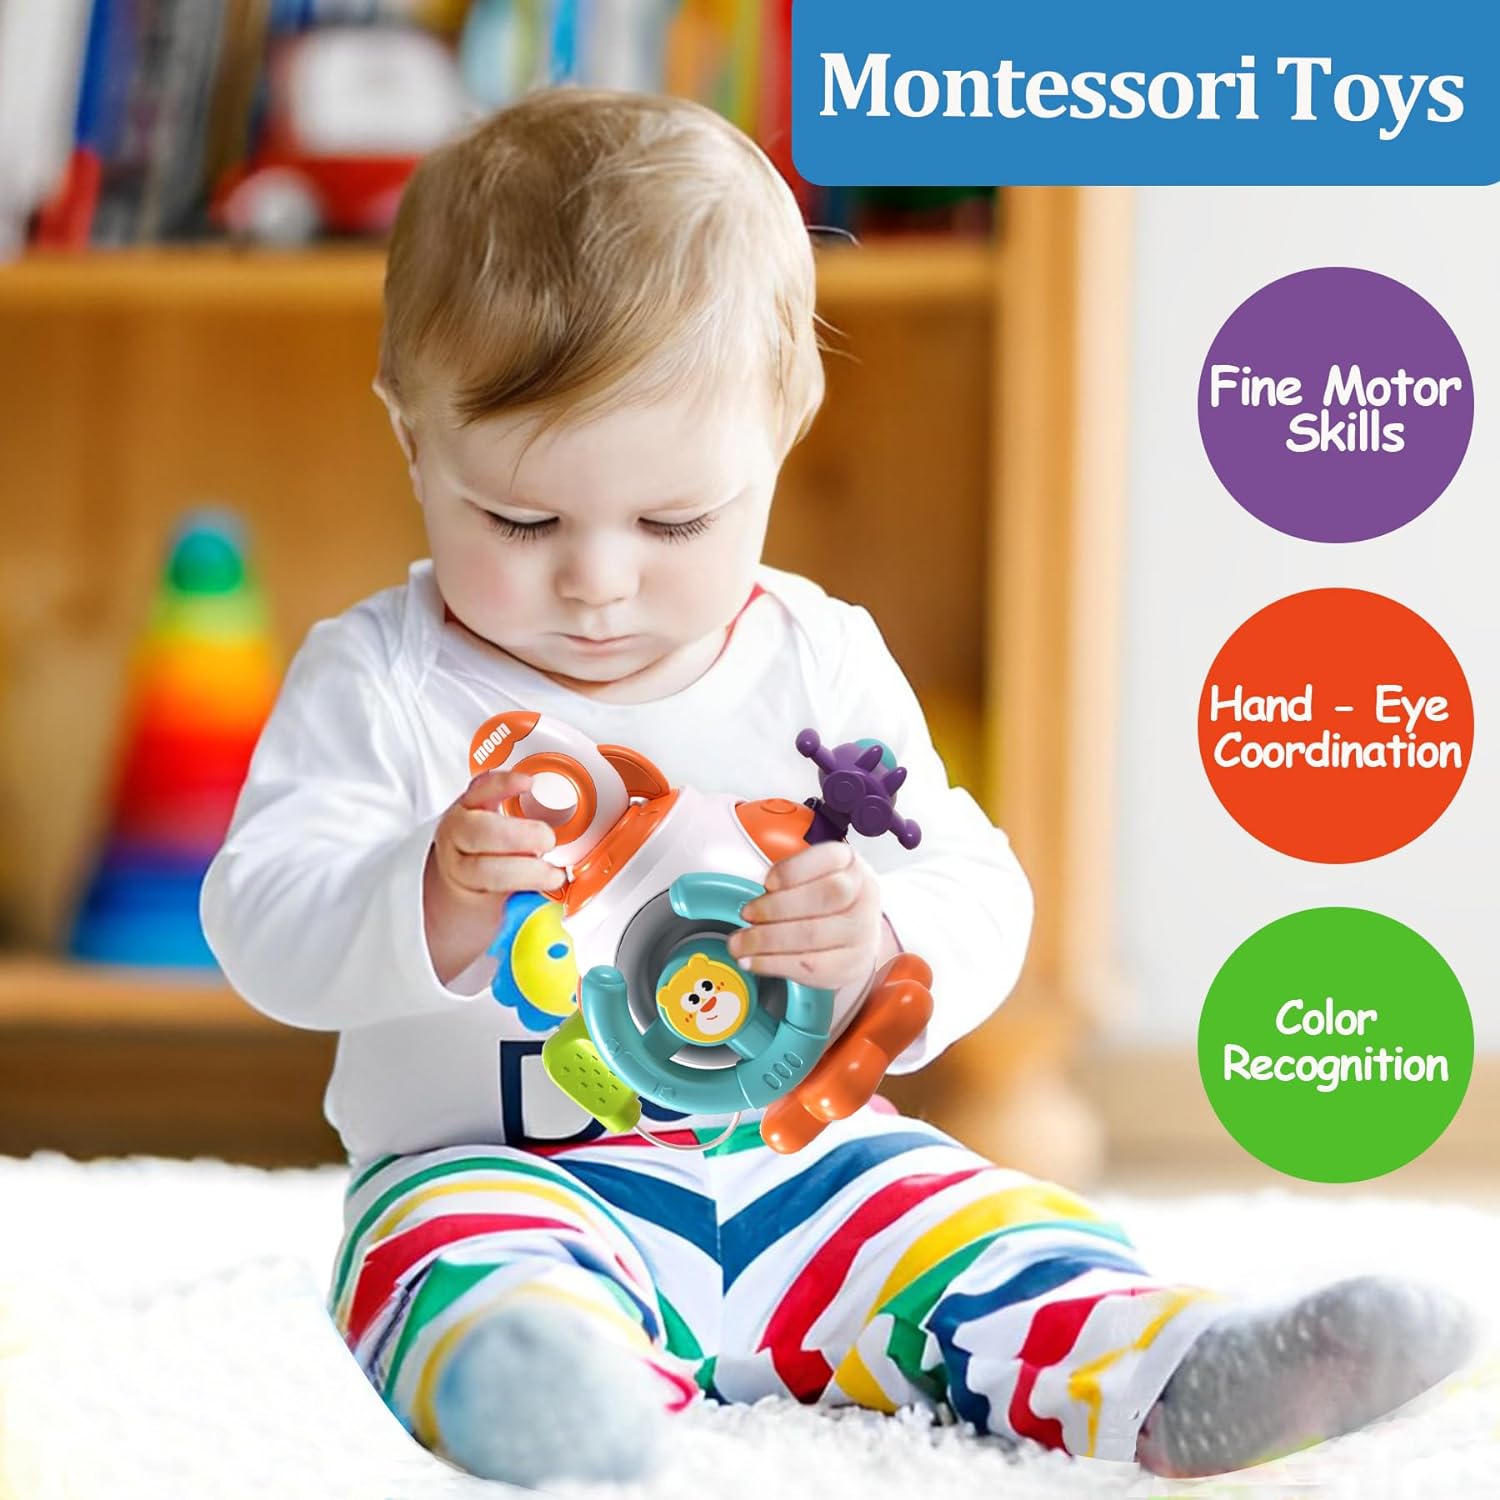 Montessori Sensory Toys for Toddlers 1-3 - Travel Activities Busy Board Cube - Baby Gifts for 6 9 12 18 Months 1 2 One Year Old Infant Boys Girls - Airplane Plane Car Travel Toys Educational Learning